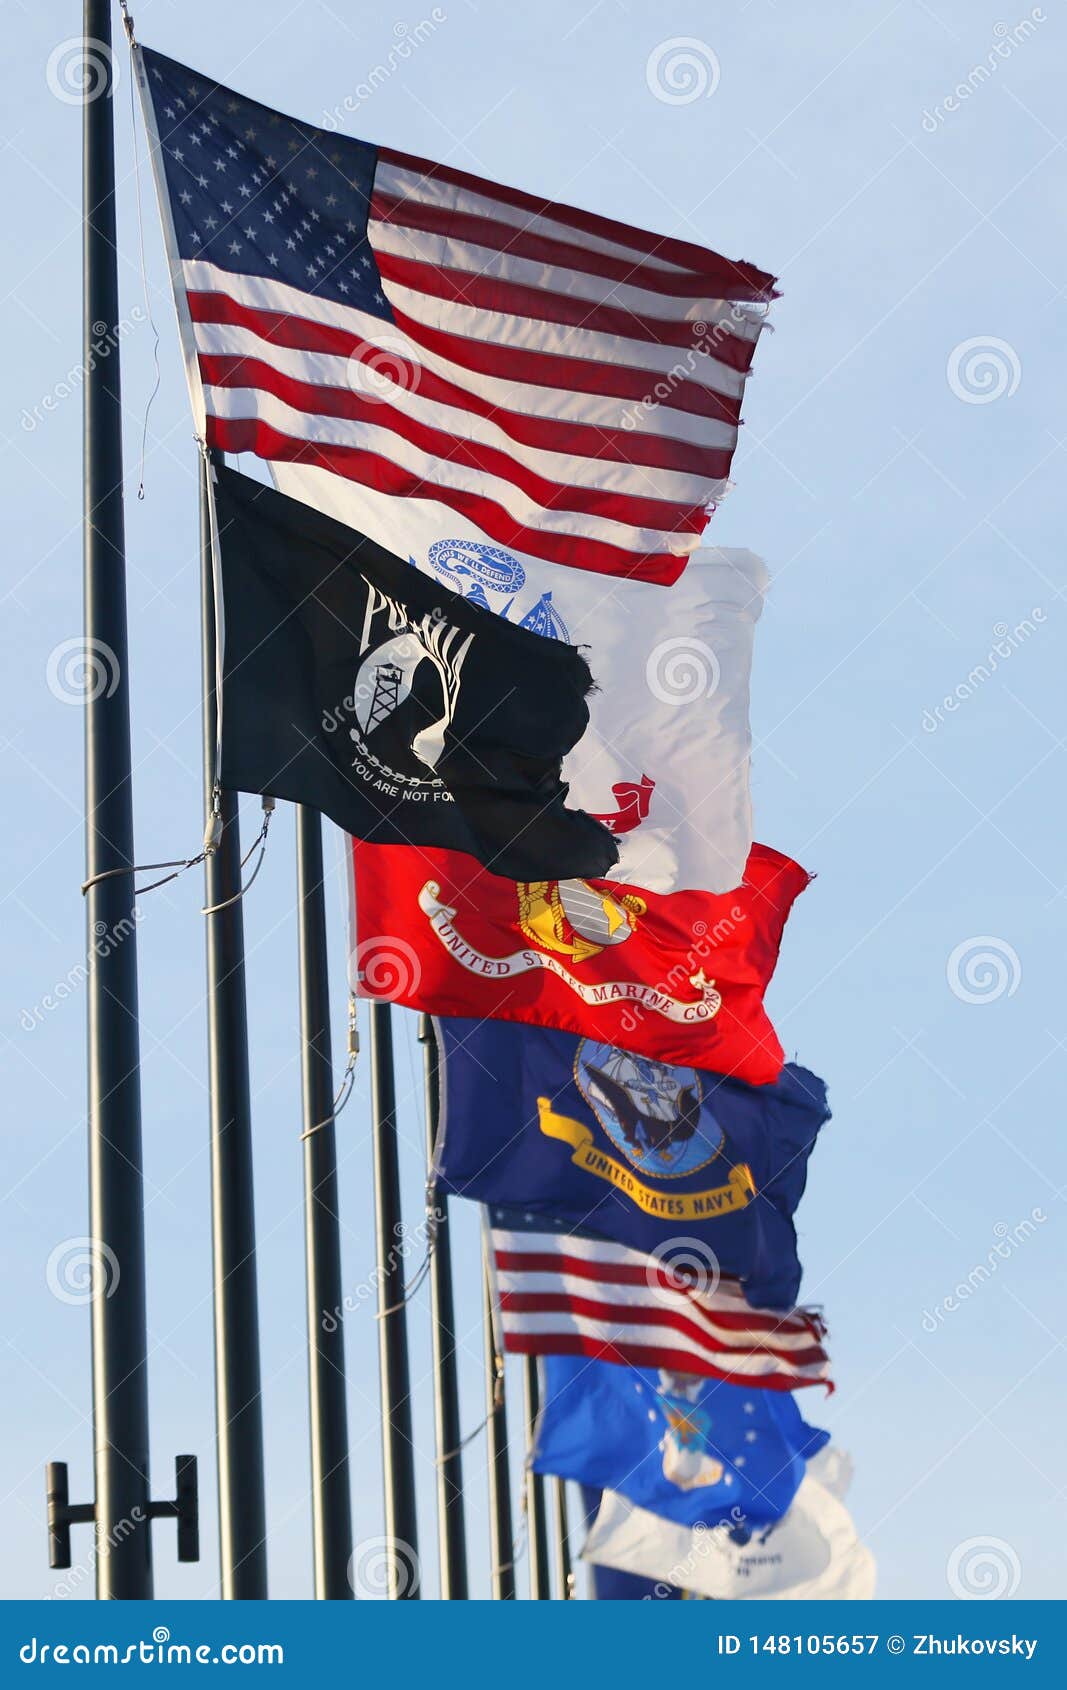 Military Flags Of The United States Stock Image Image Of Memorial